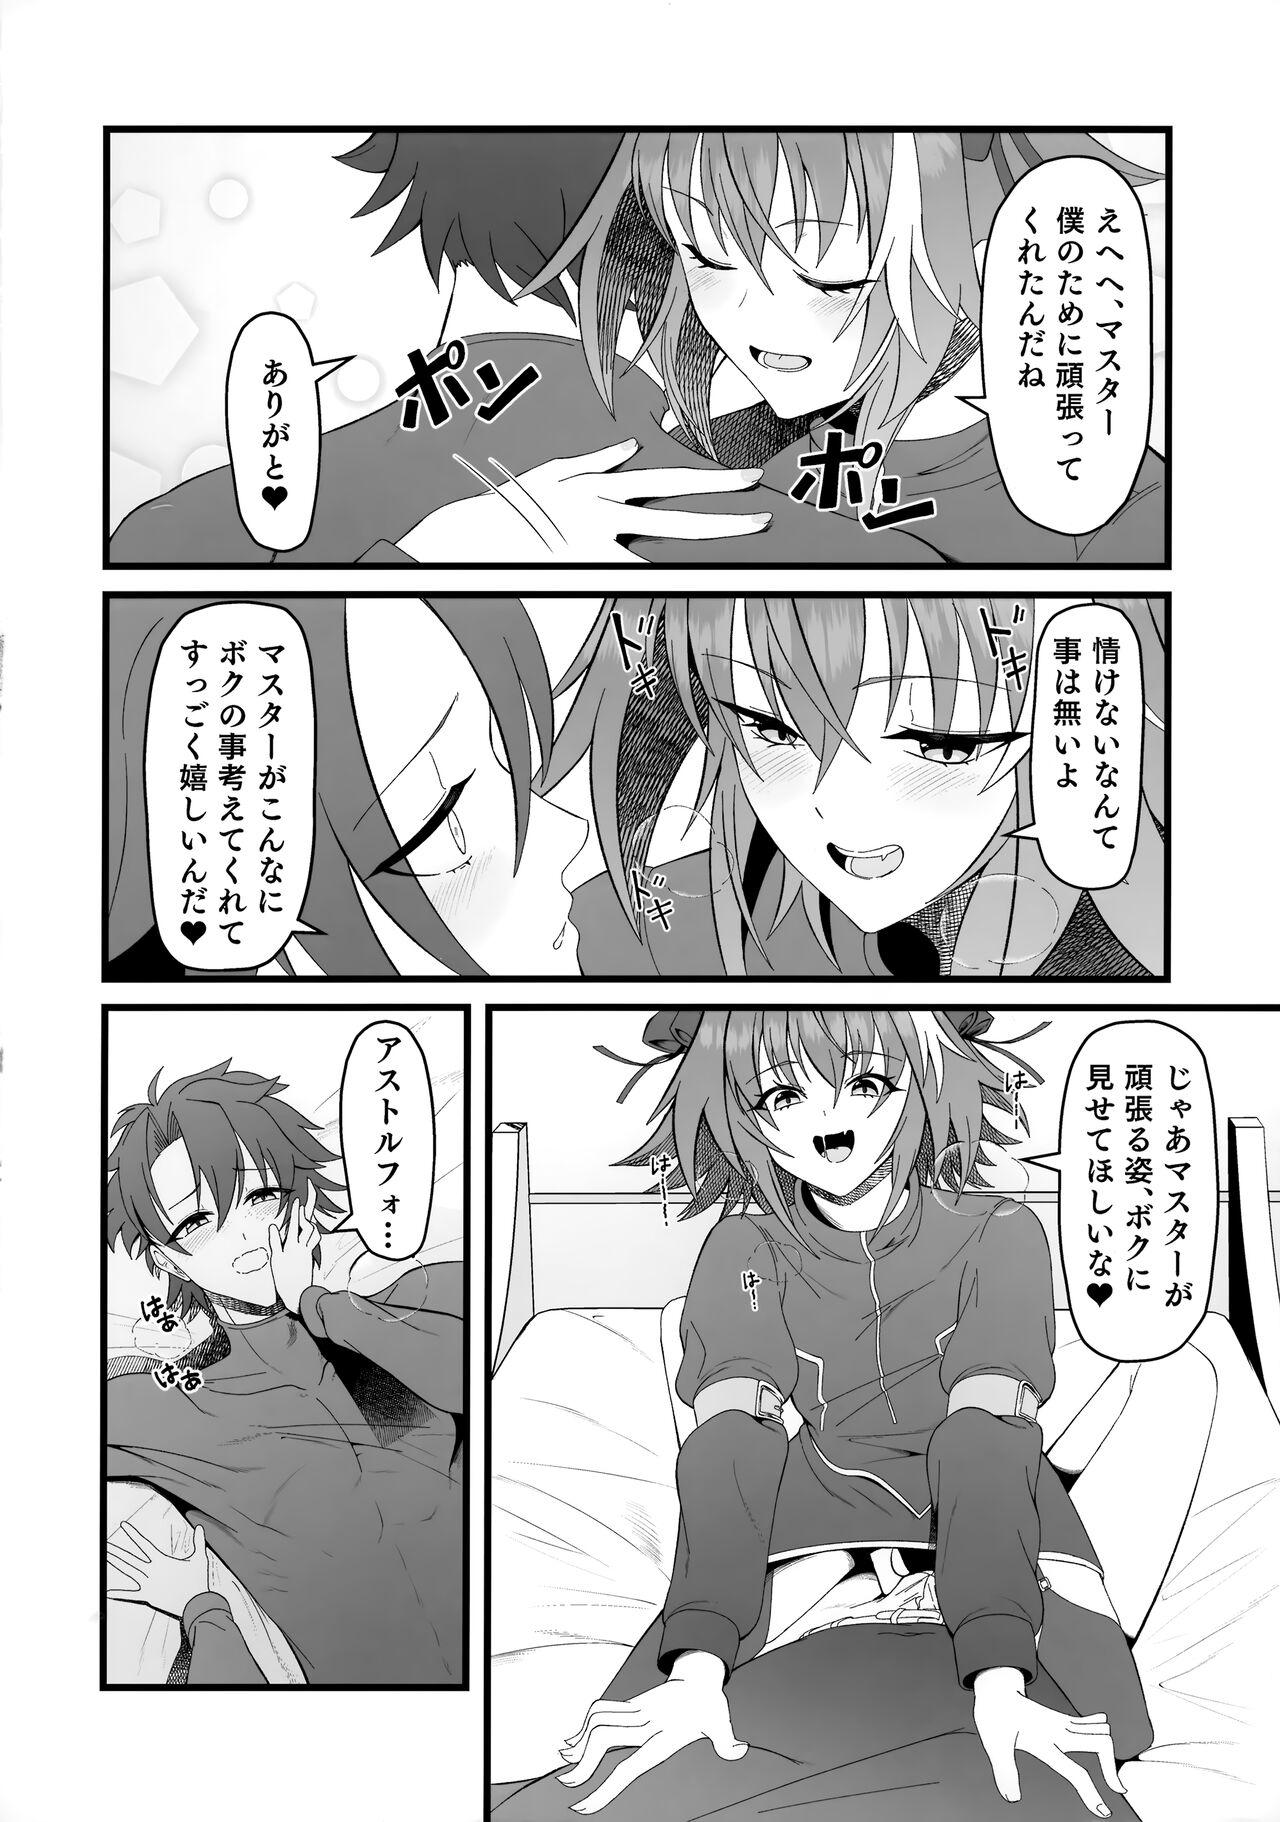 Family Porn Kimi no Ichiban ni Naritakute - I wanted to be your number one. - Fate grand order Bang Bros - Page 9